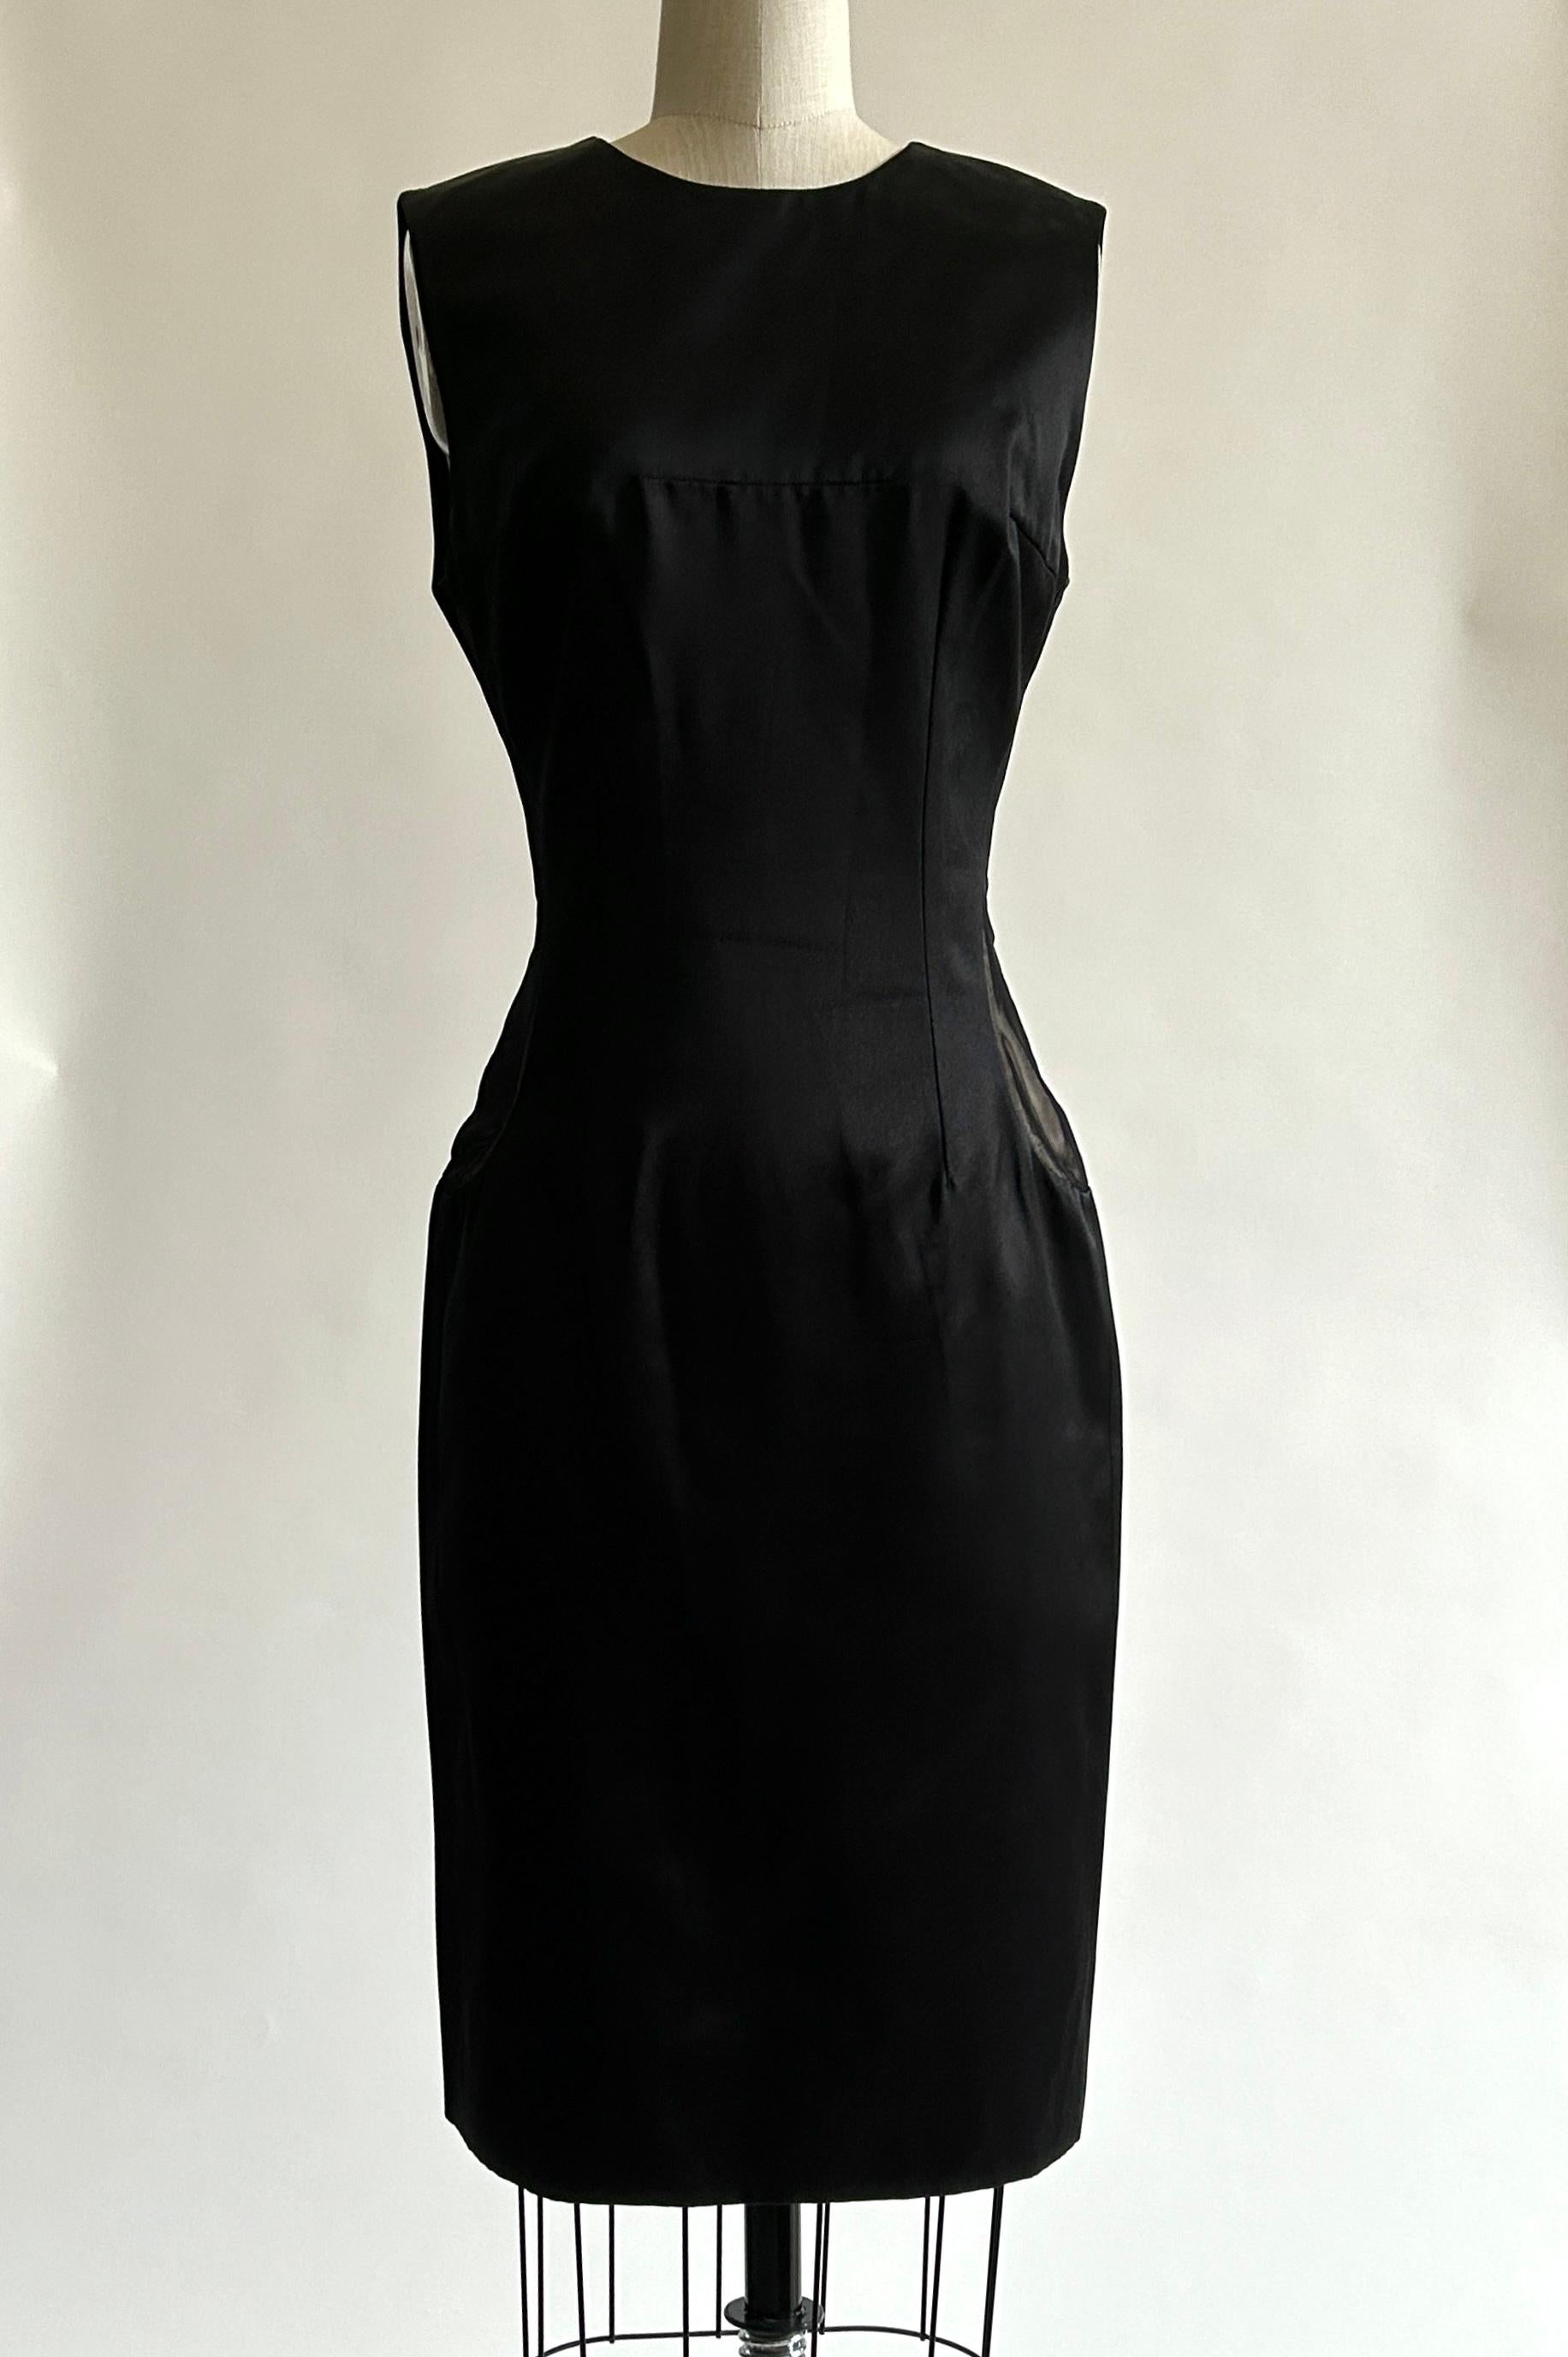 Alexander McQueen fitted black silk dress with sheer mesh teardrop shaped panels at sides with nude lining beneath. The unexpected panels add just enough edginess to a classic black dress! Back zip.

100% silk.
Lining 100% silk. 

Made in